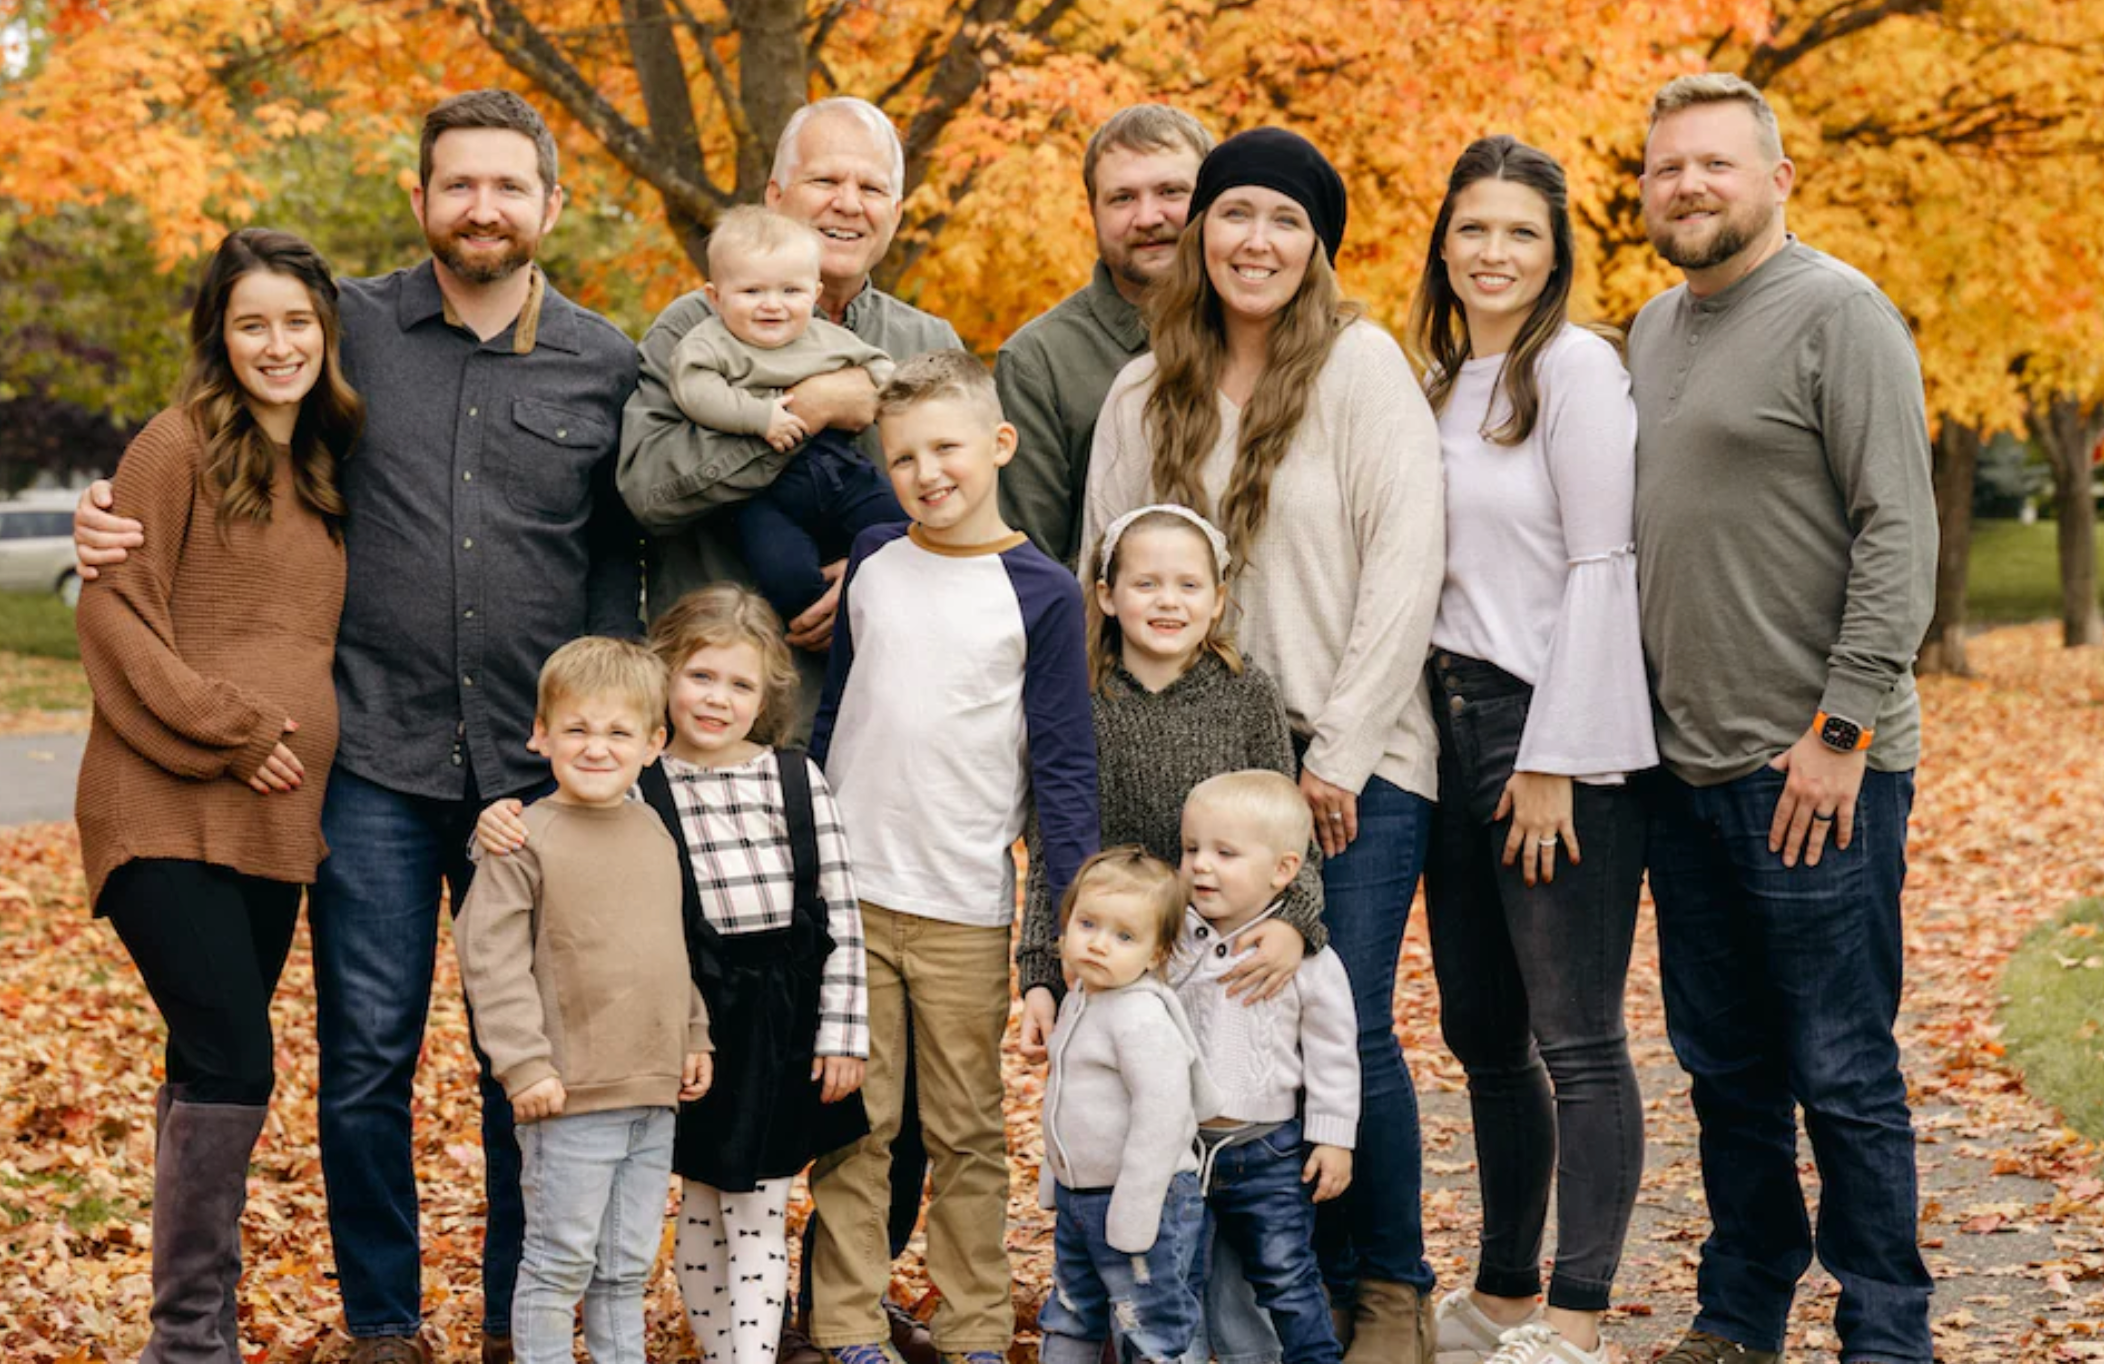 The entire Barnes family stands together in a park. They are smiling at the camera and behind them is fall foliage.